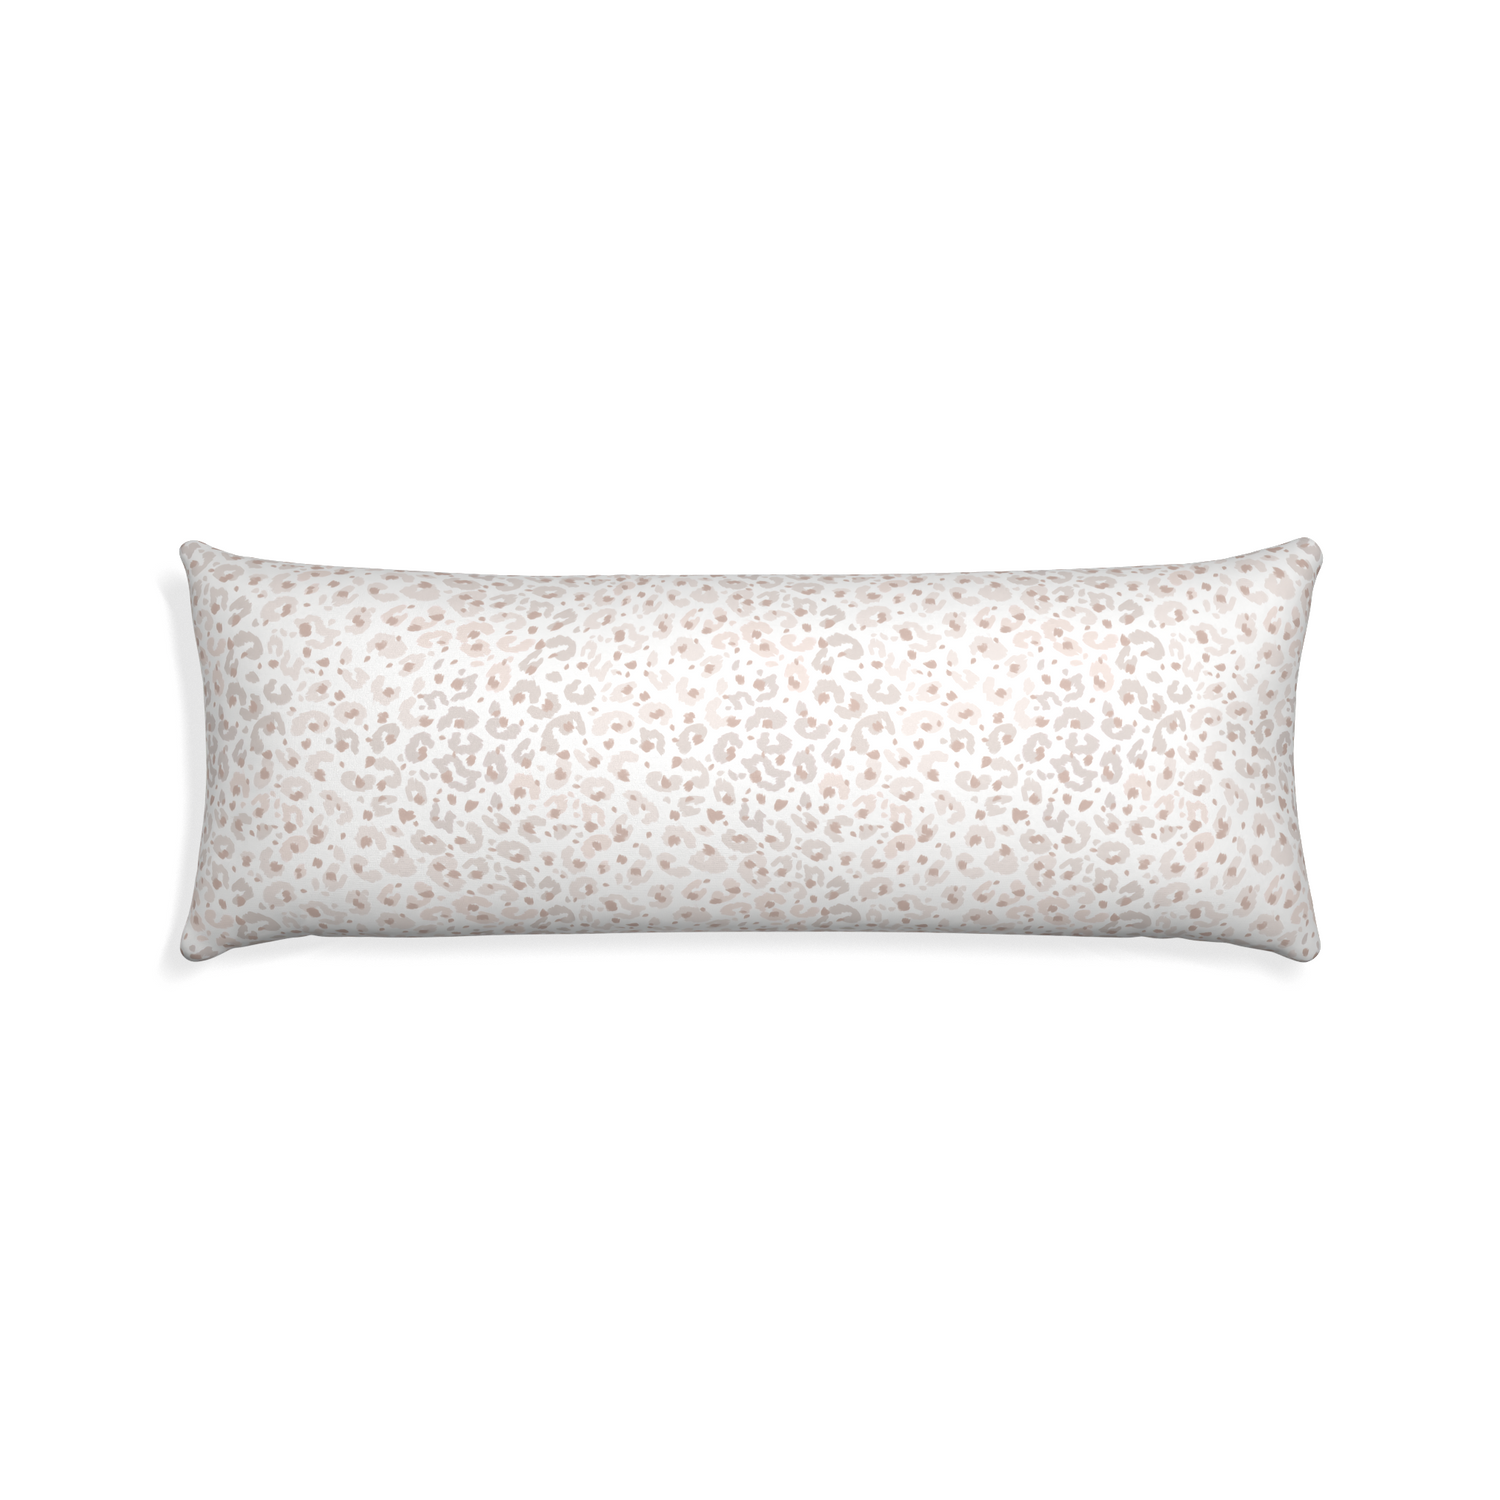 Xl-lumbar rosie custom beige animal printpillow with none on white background